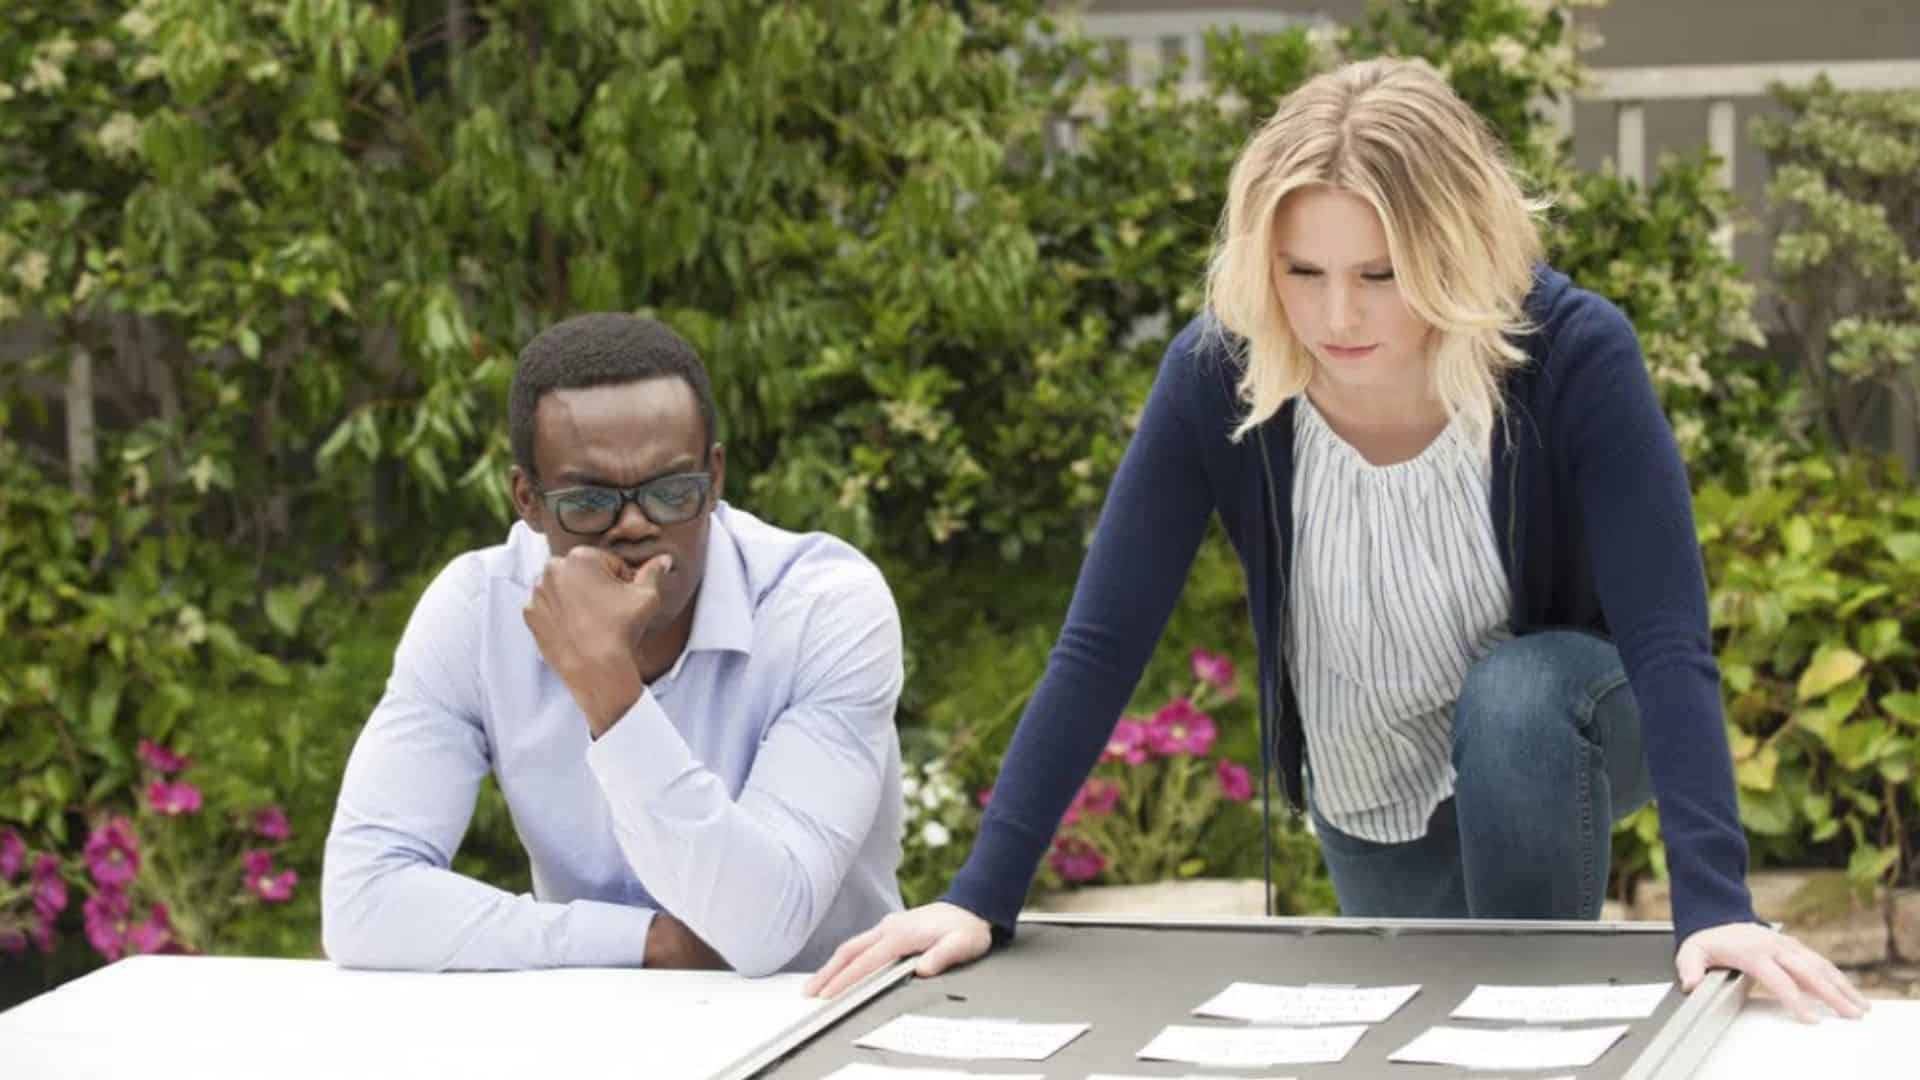 Chidi and Eleanor examine a table with cards on it.